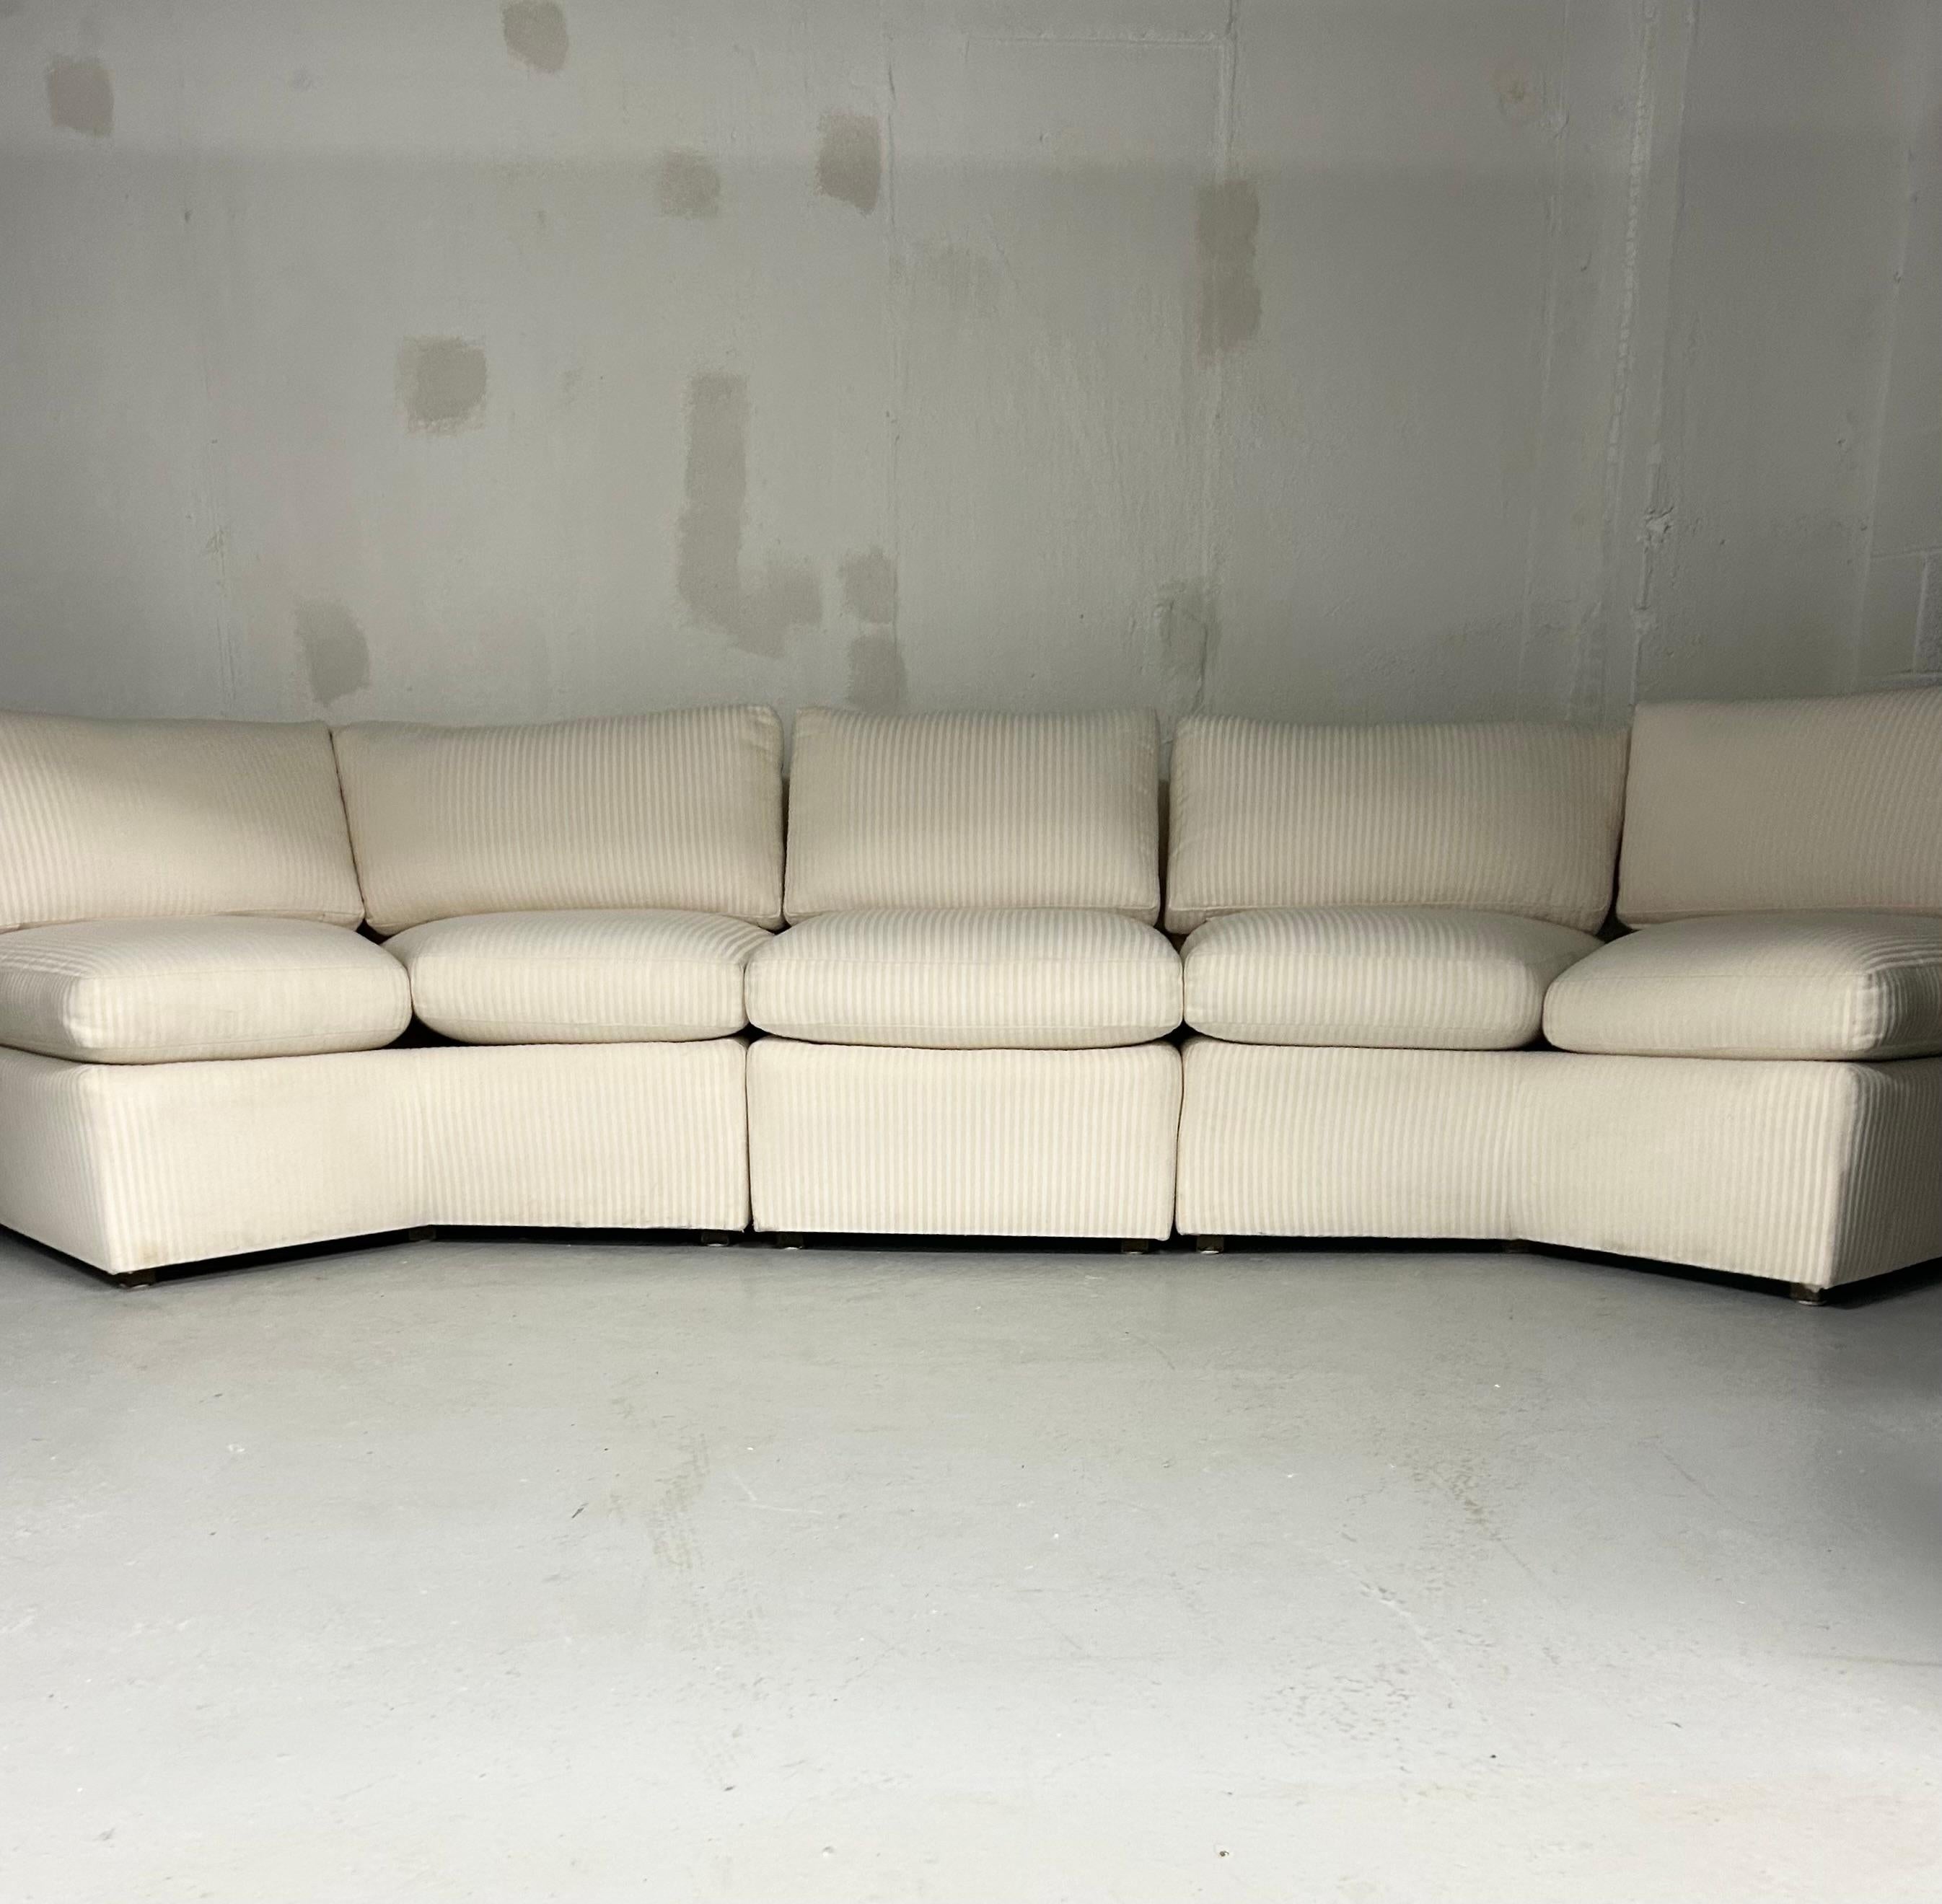 Vintage sectional sofa in off white woven upholstery with textured stripe. So comfy. Can be configured so many ways to fit your space. Minimal wear. Few light marks on back and sides. No manufacturer tag.

135” length but can curve to break up